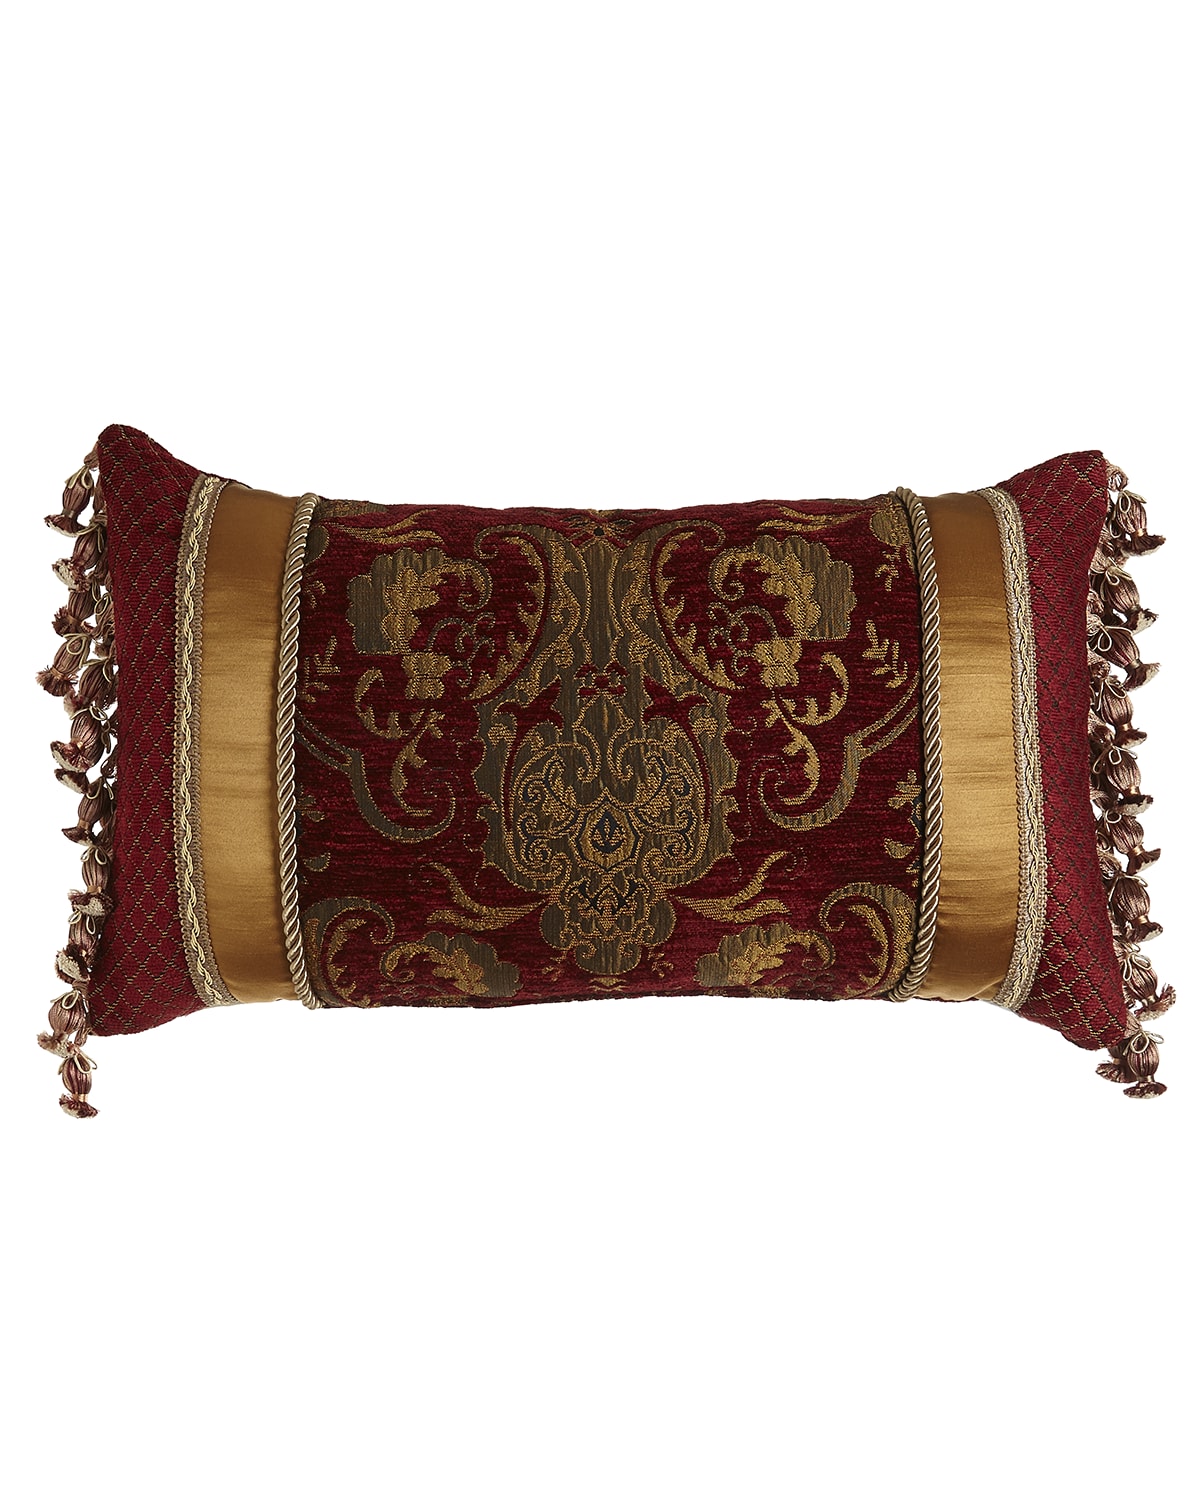 Image Austin Horn Collection Scarlet Pieced Pillow with Onion Fringe at Sides, 13" x 24"